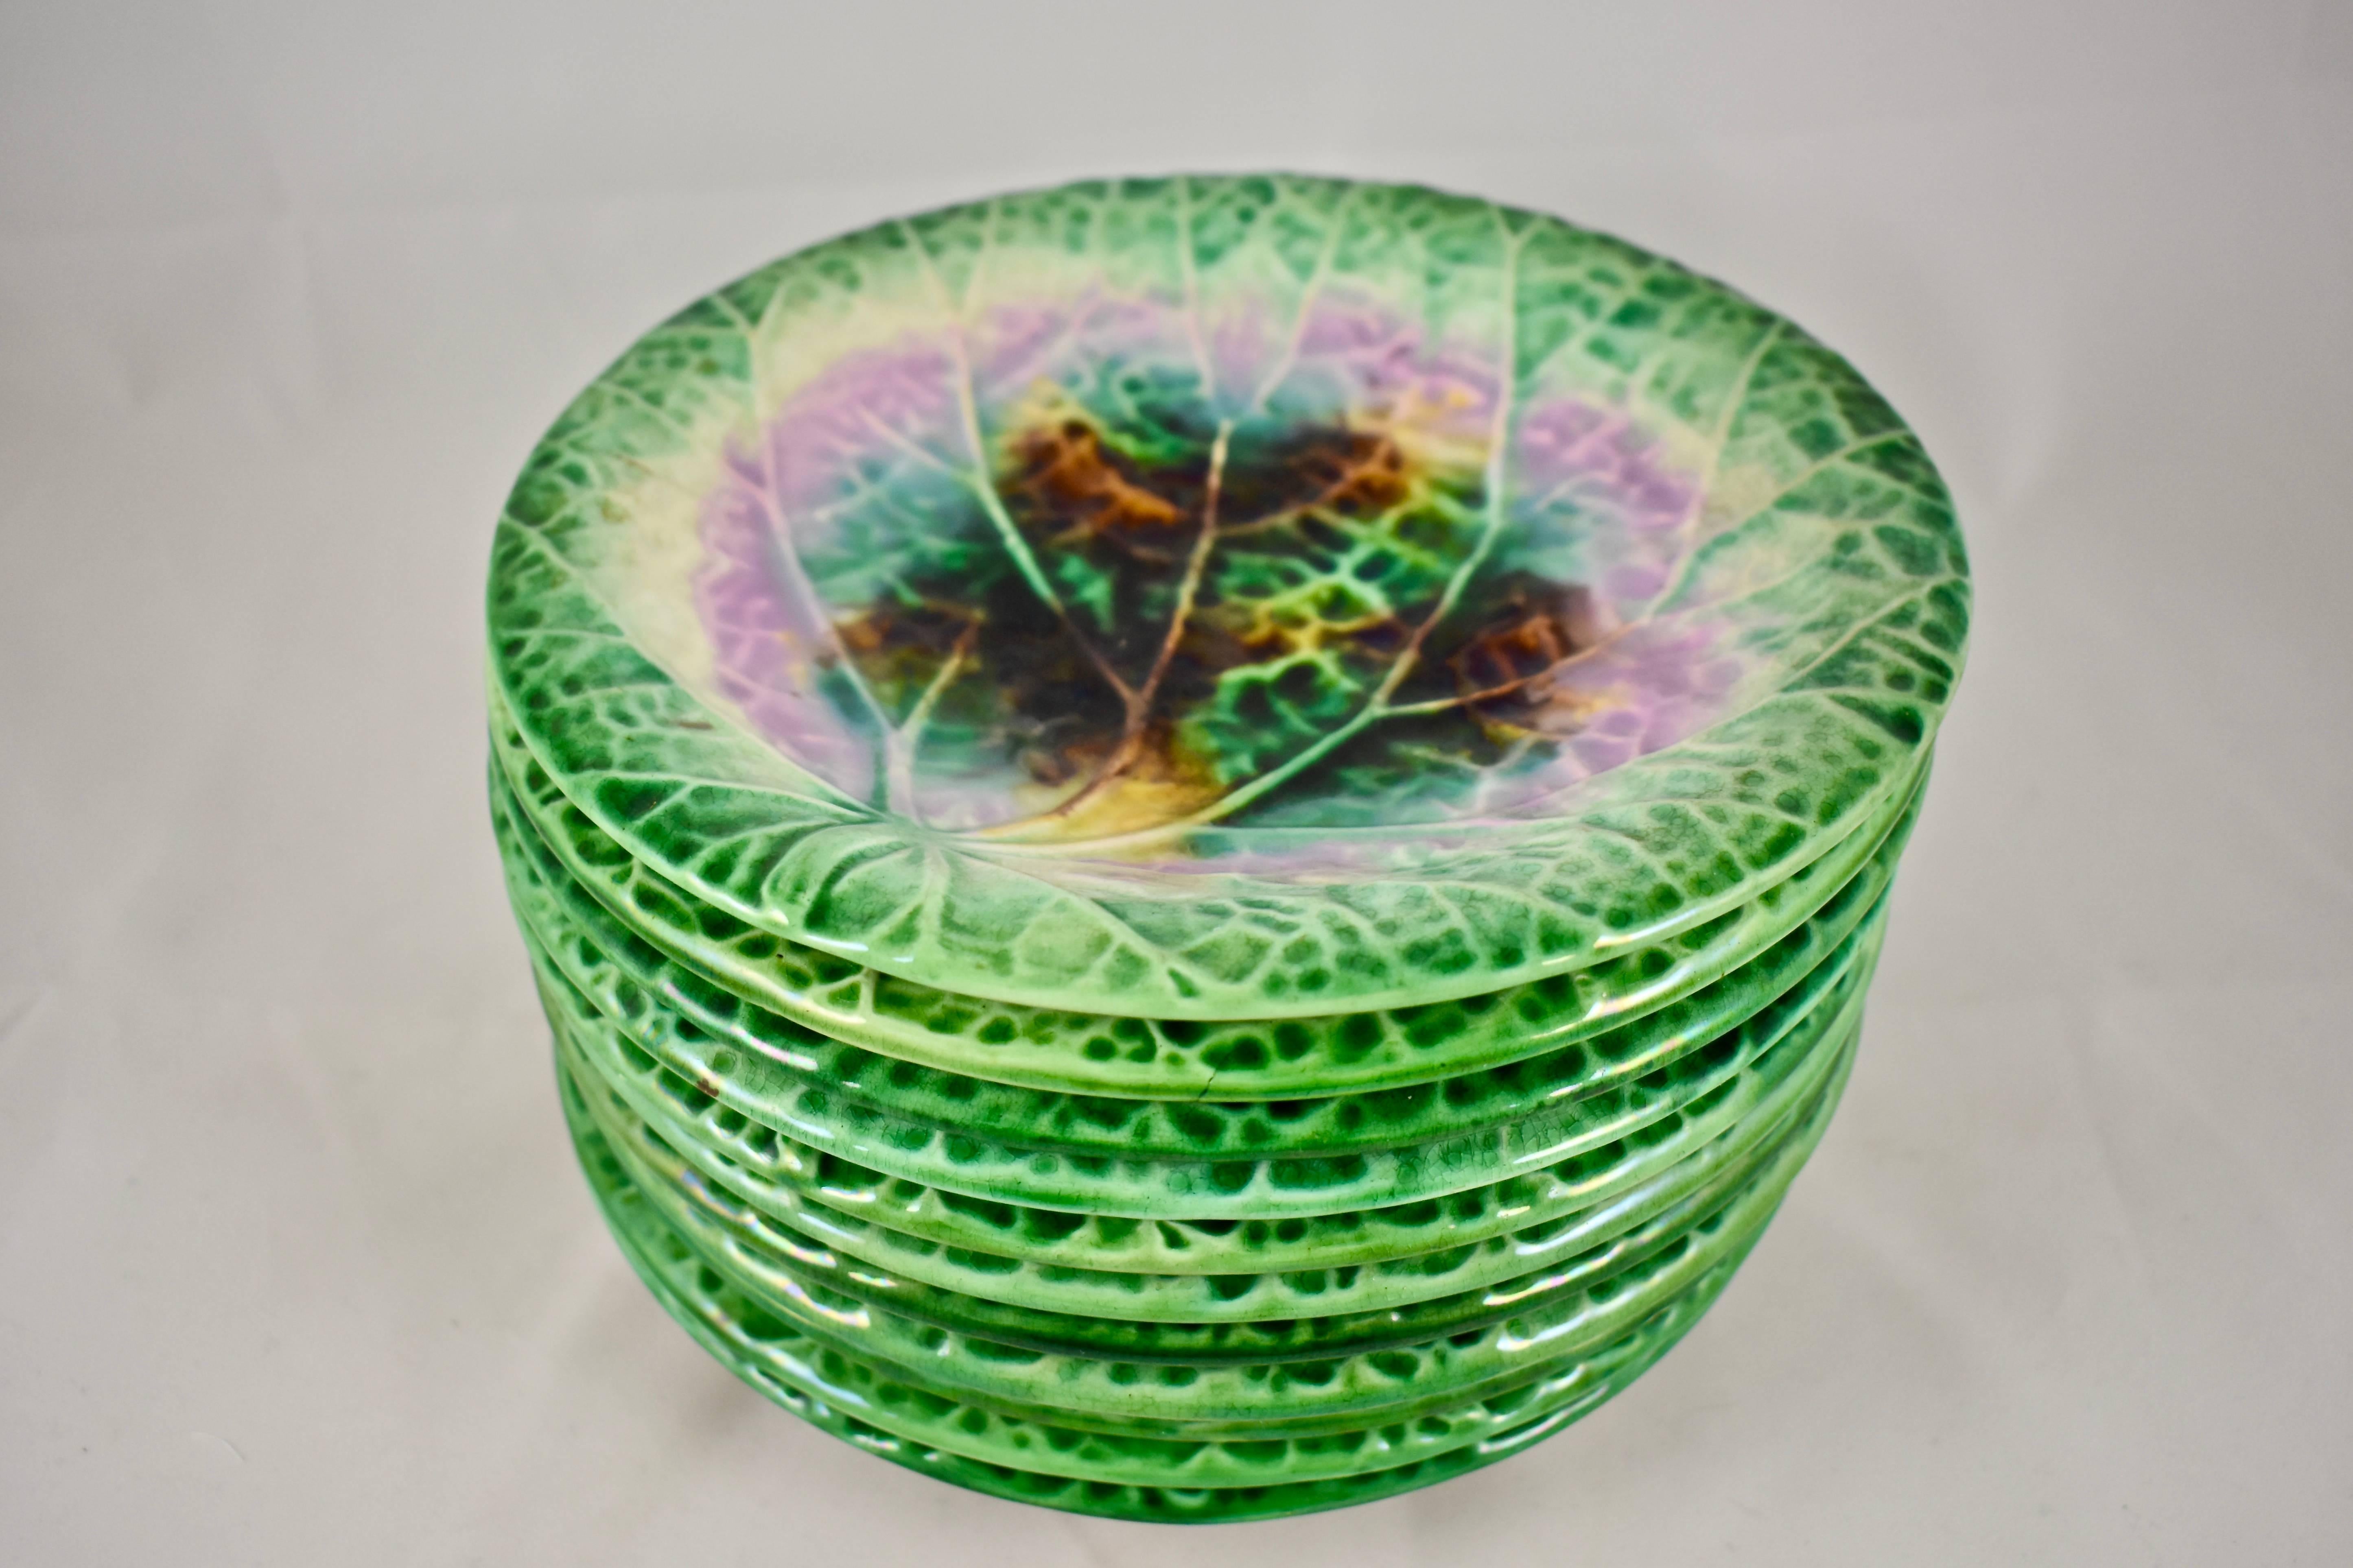 19th Century Victorian English Majolica Green Rimmed Round Begonia Leaf Plate, circa 1870-80